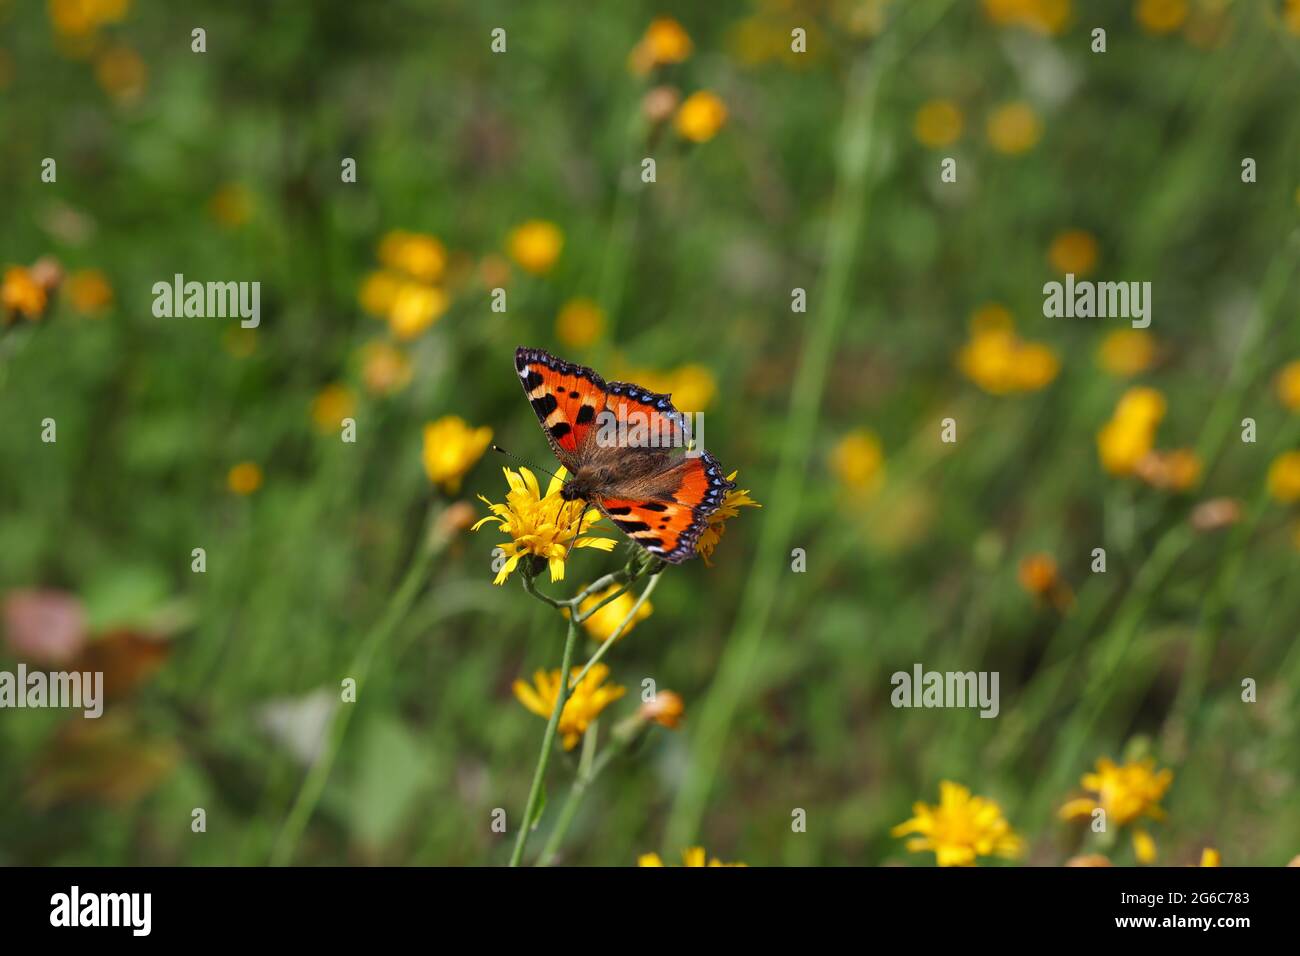 Small Tortoiseshell Butterfly Pollinates Yellow Flower in Nature. Aglais Urticae Collects Nectar from Flowering Plant during Beautiful Day. Stock Photo